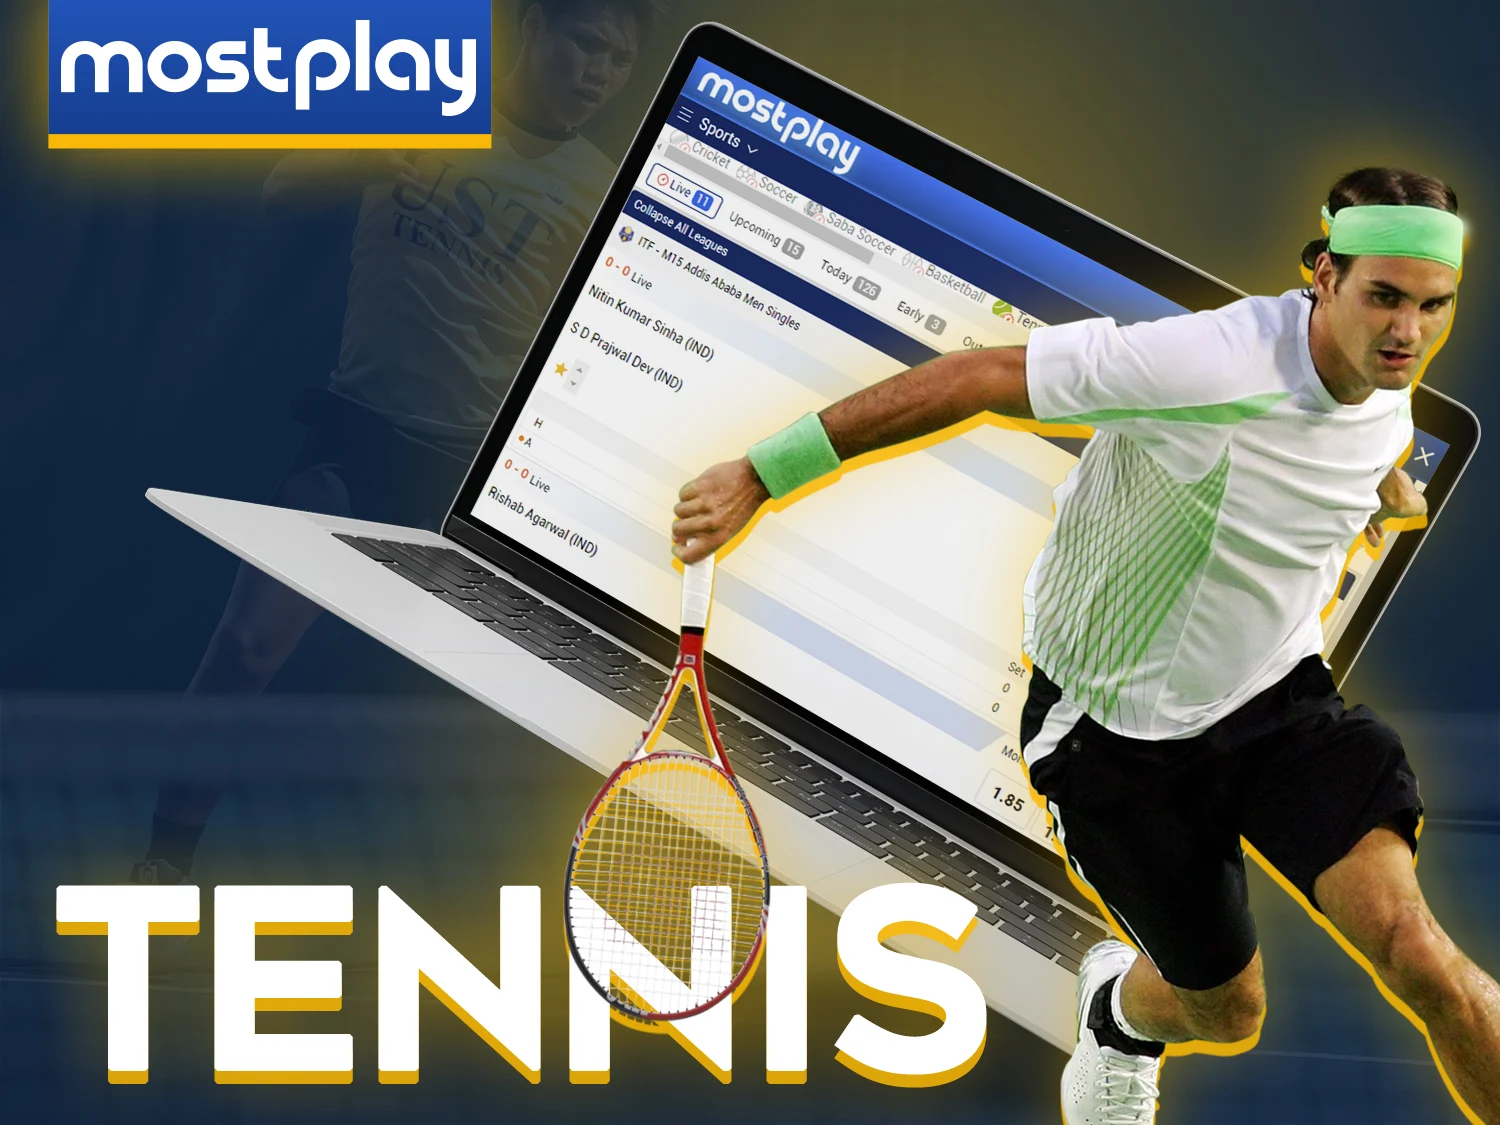 Learn more about tennis betting on the Mostplay sports page.